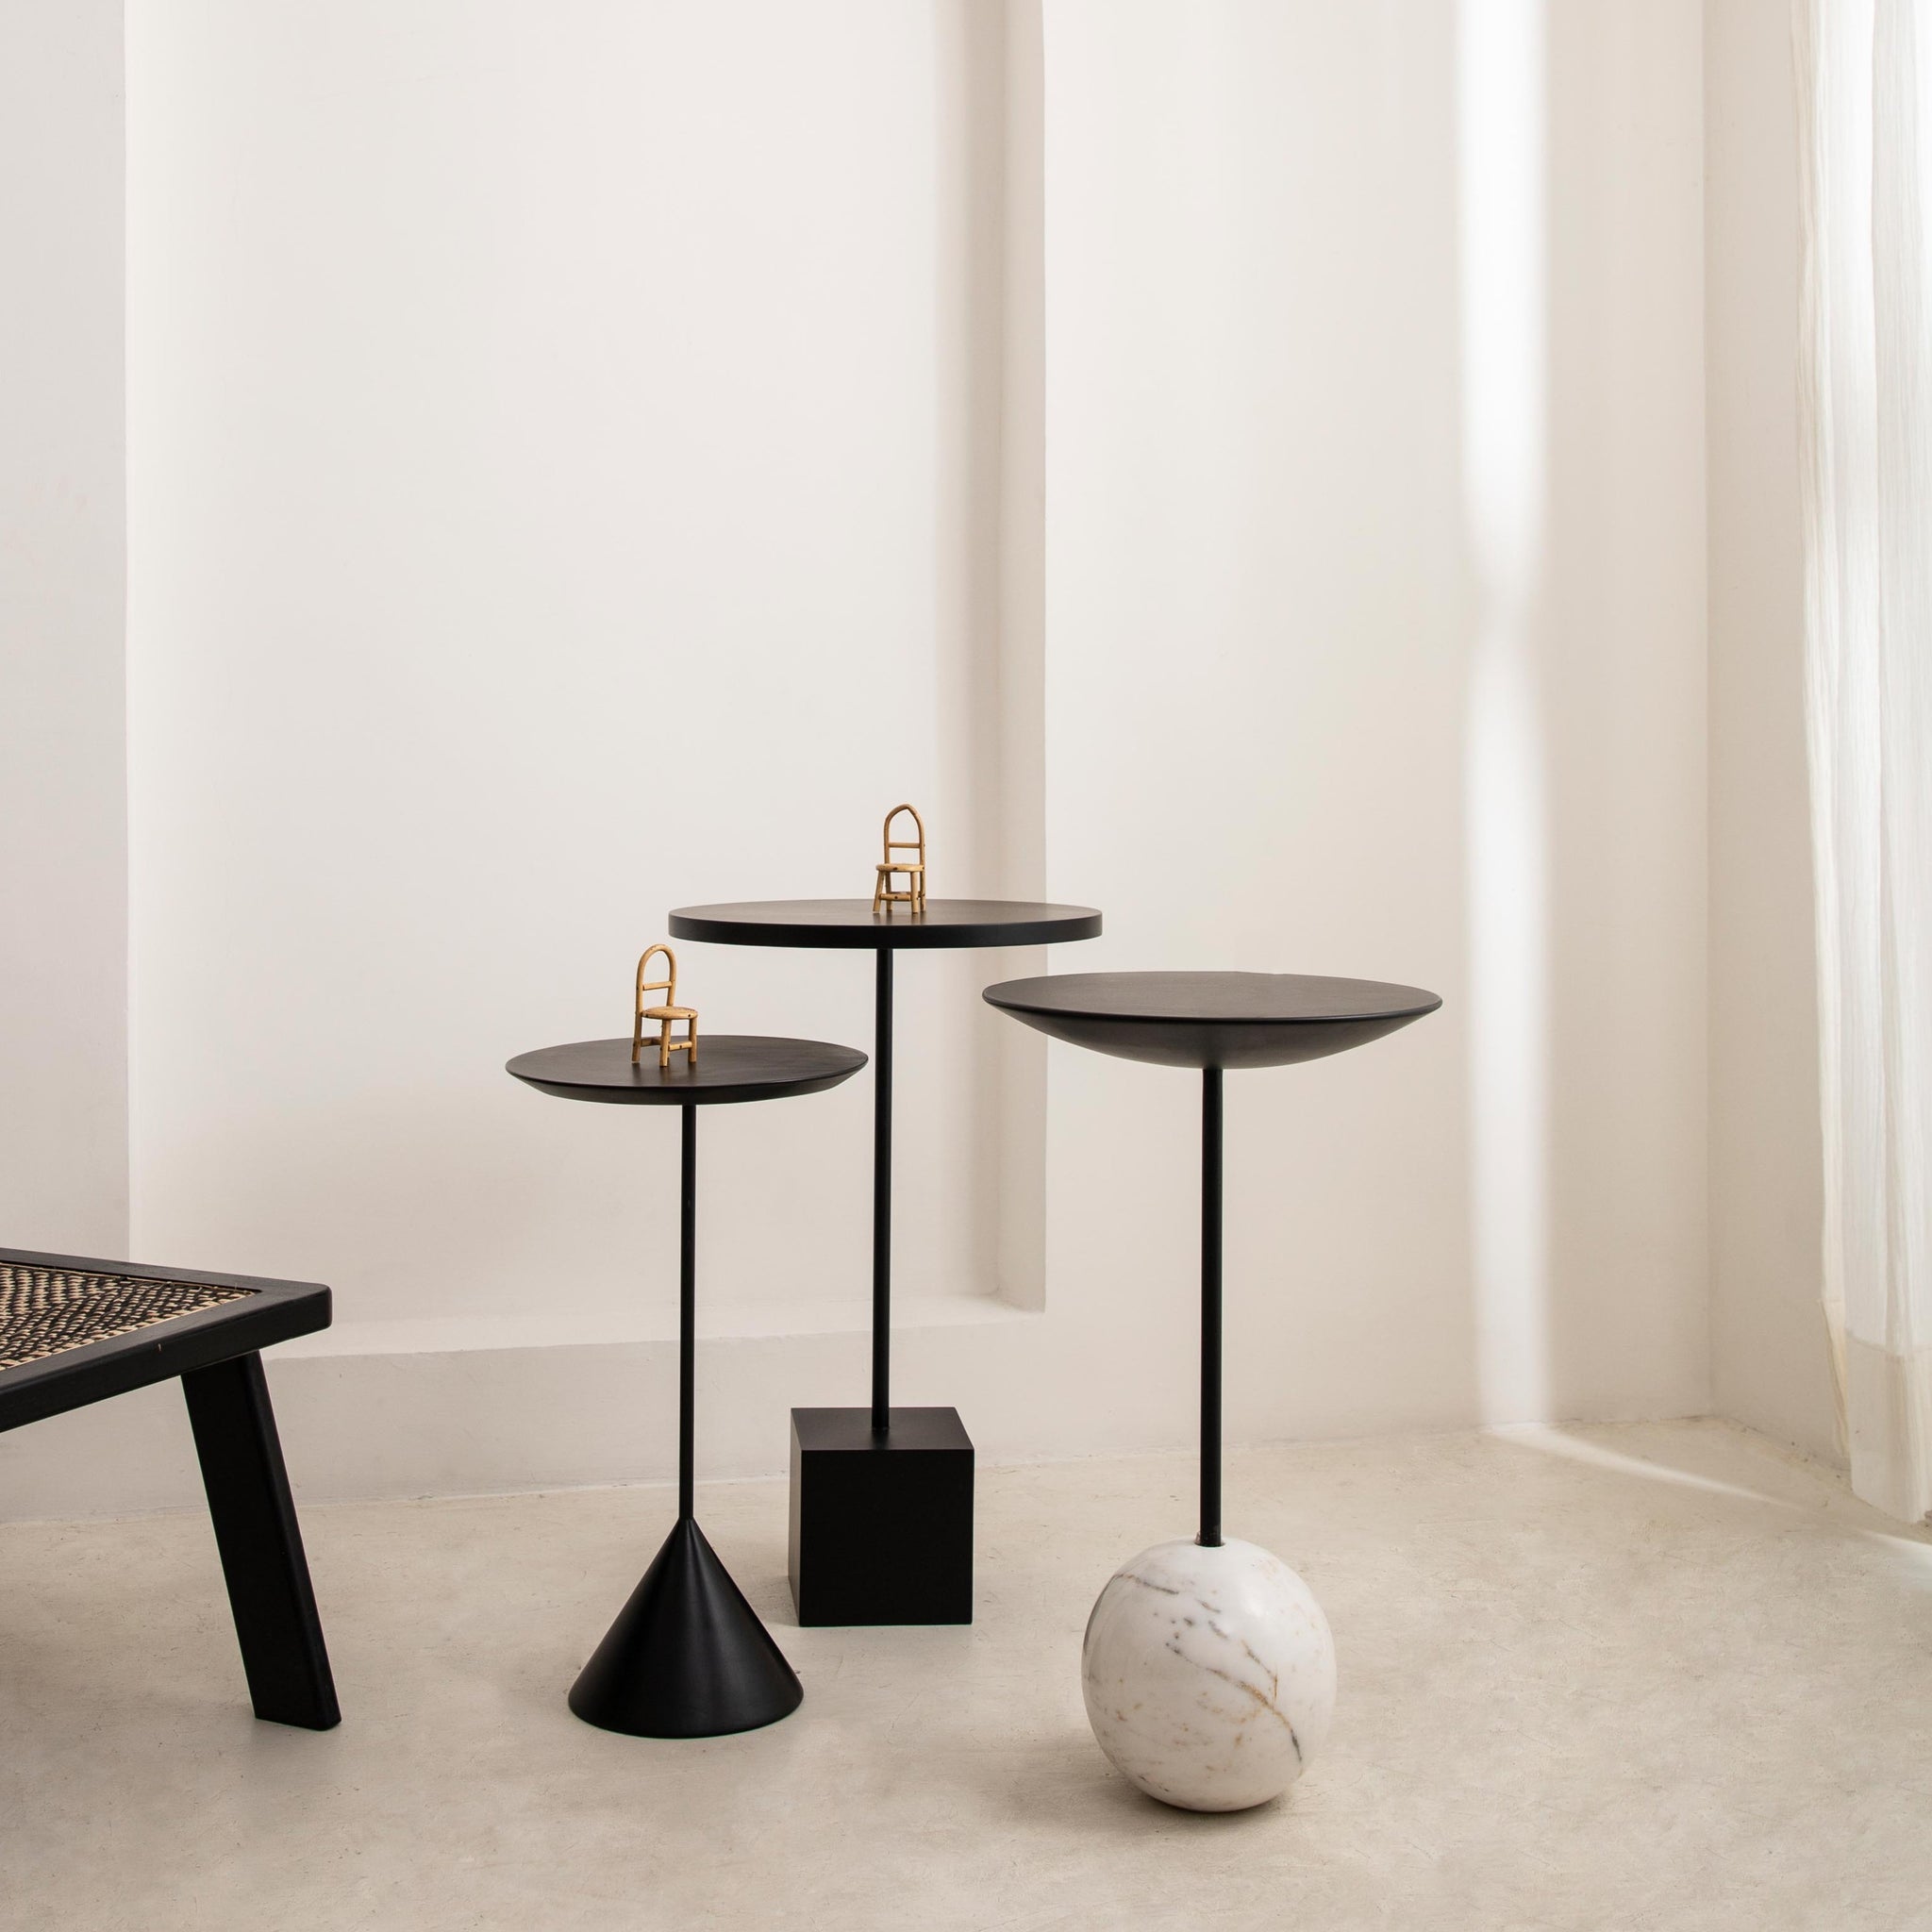 Orb Nesting Tables - Set of 3